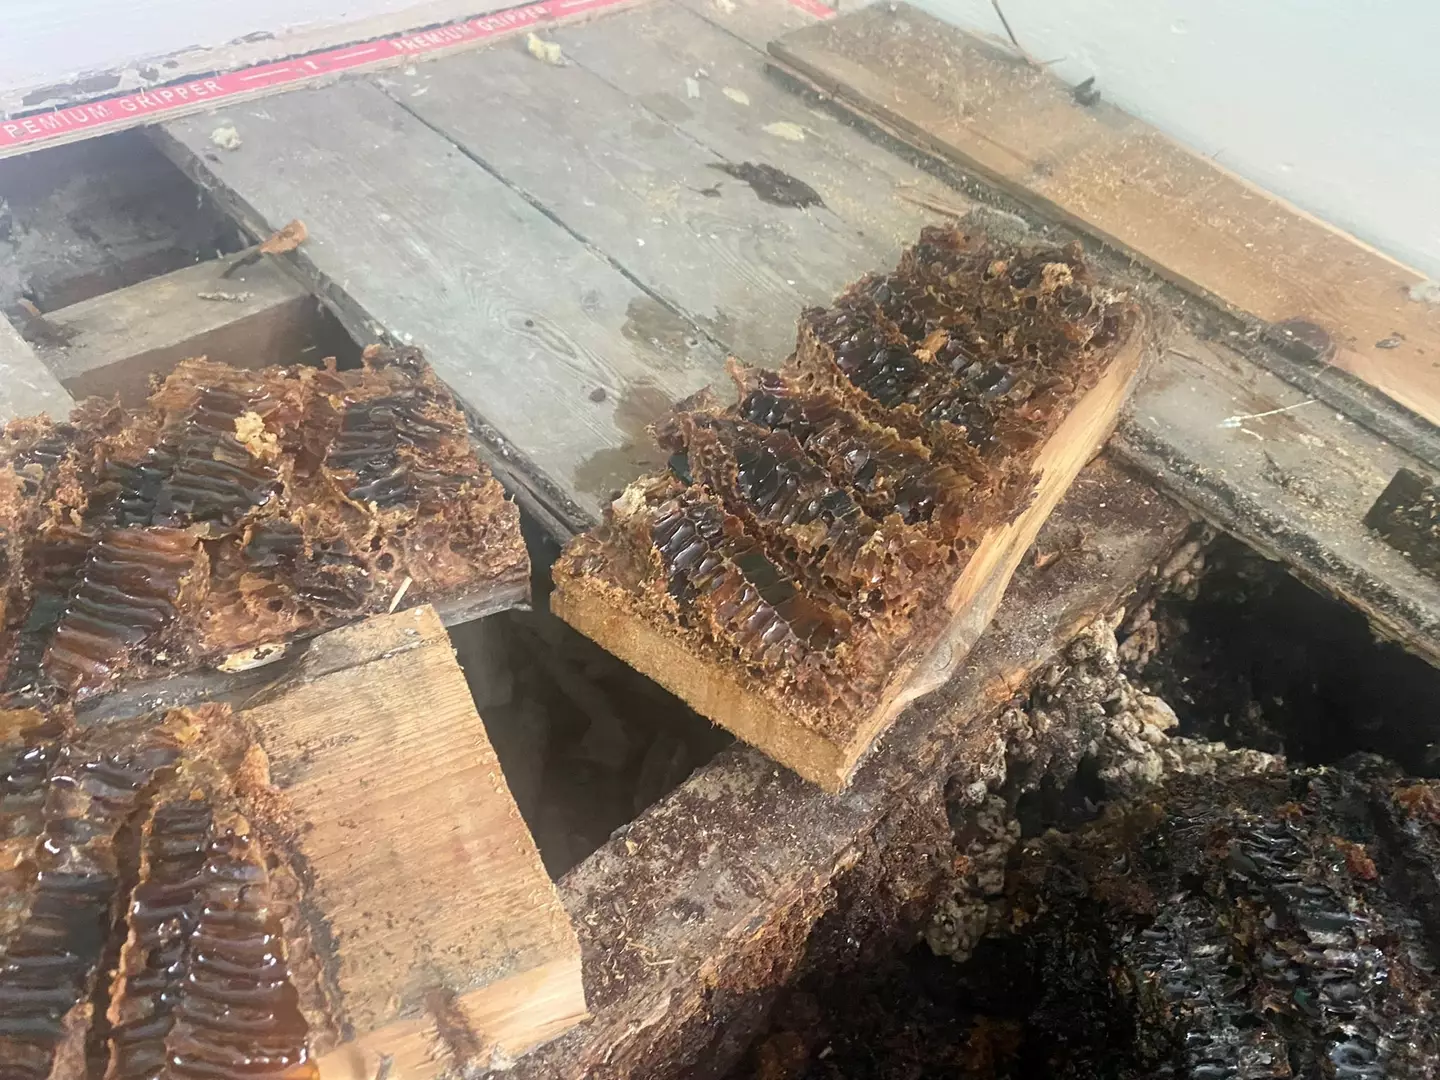 They pulled up their floorboards to reveal huge pieces of honeycomb.